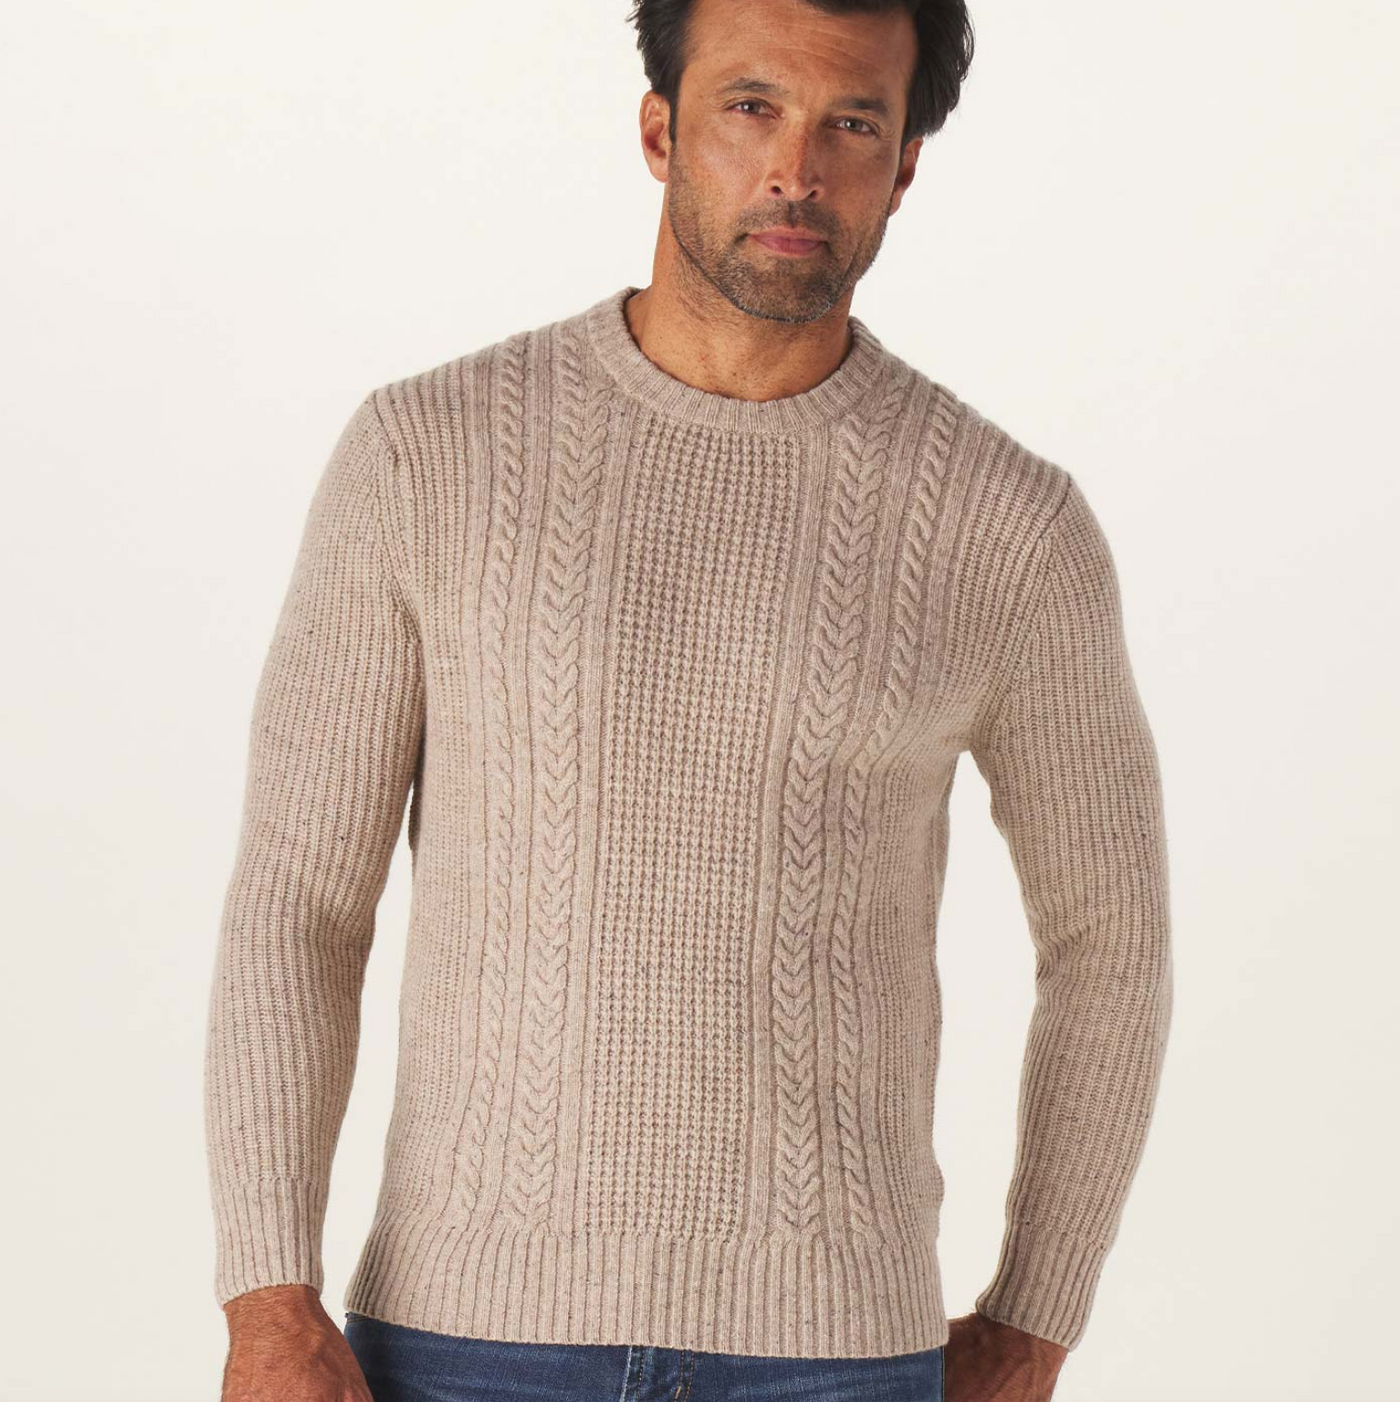 The Normal Brand - Kennedy Crew Sweater - Stone